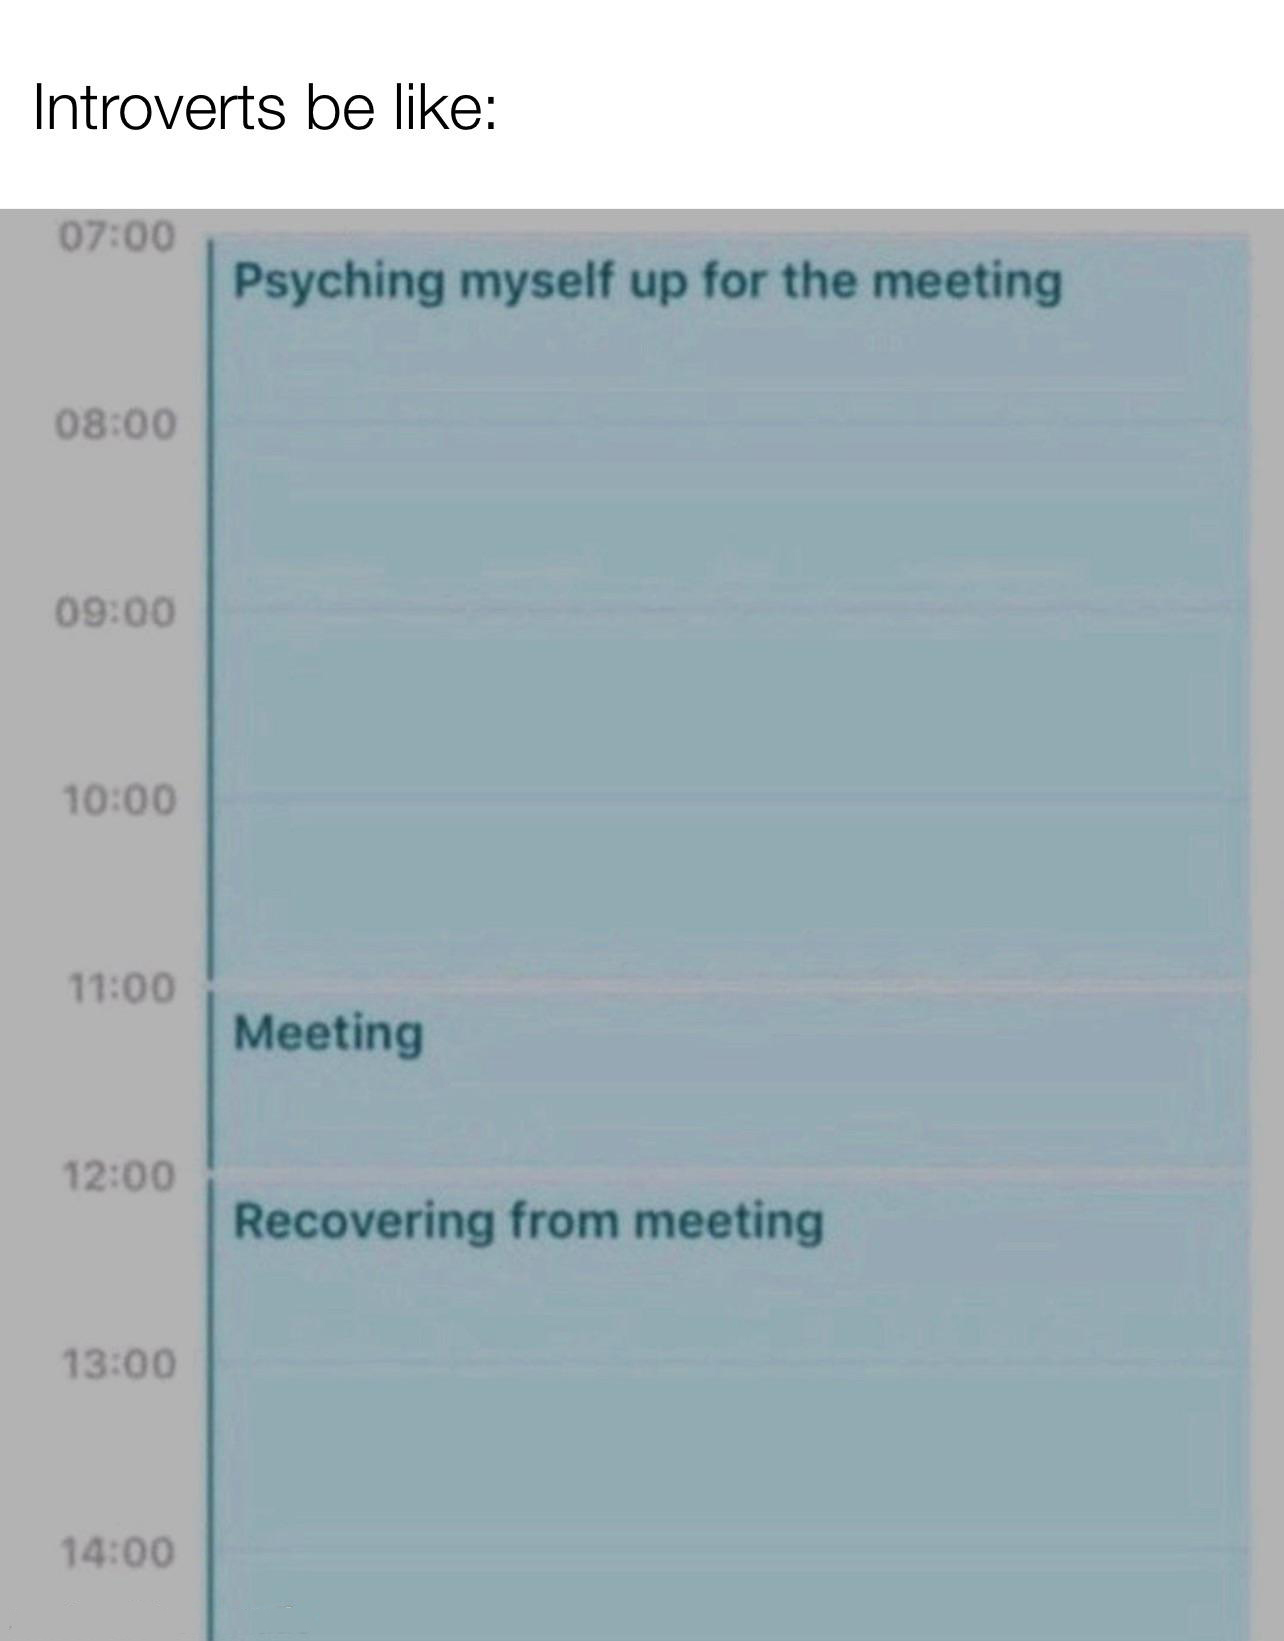 software - Introverts be Psyching myself up for the meeting Meeting Recovering from meeting